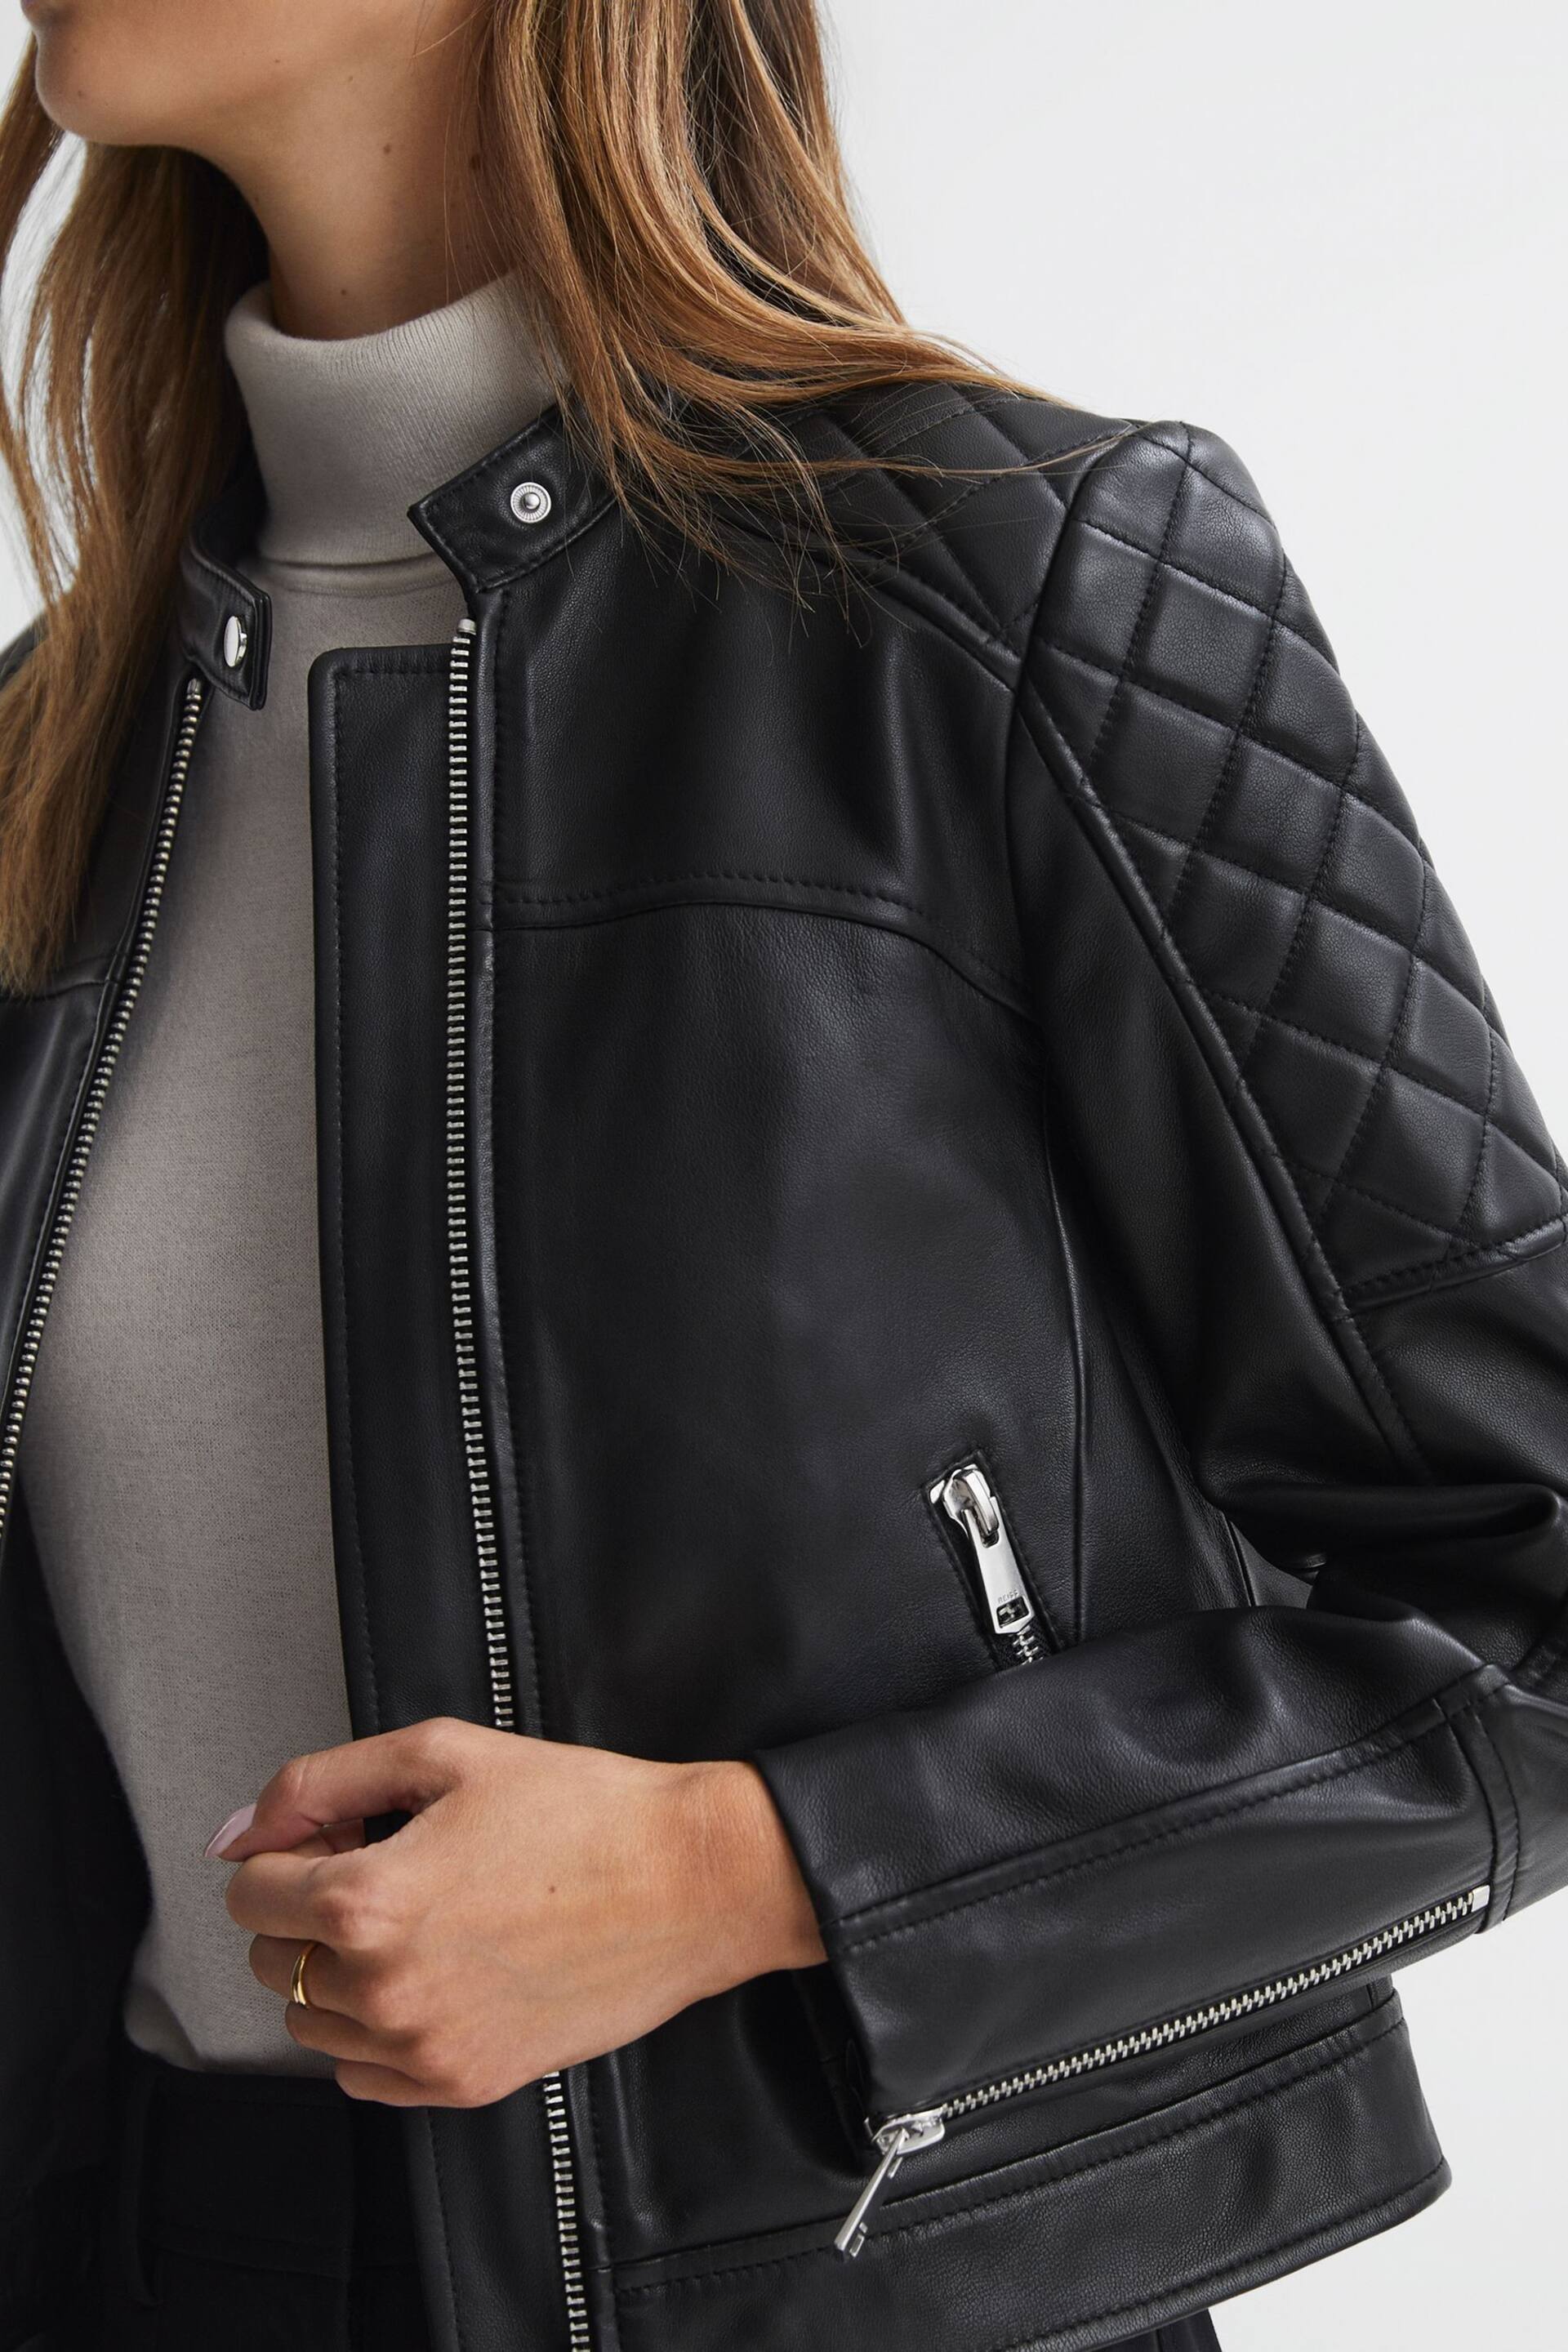 Reiss Black Adelaide Leather Collarless Quilted Jacket - Image 1 of 5